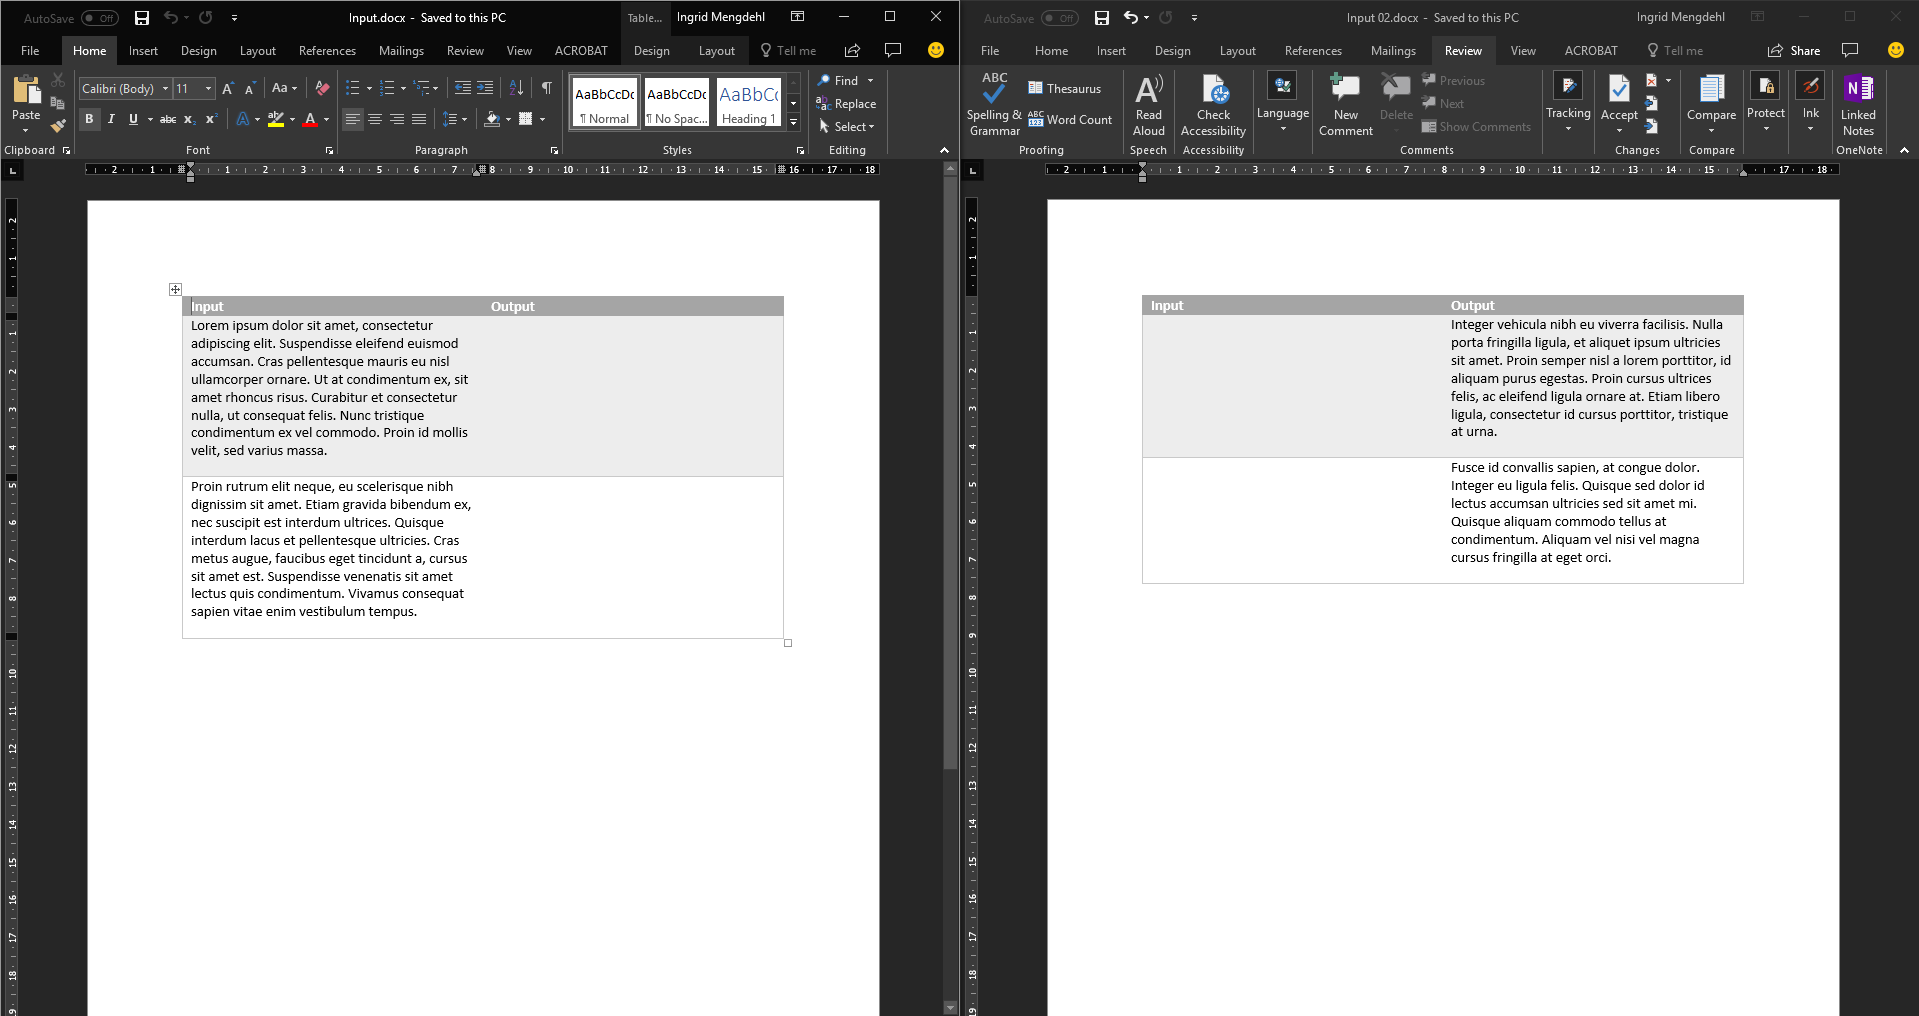 Merge two versions of a document